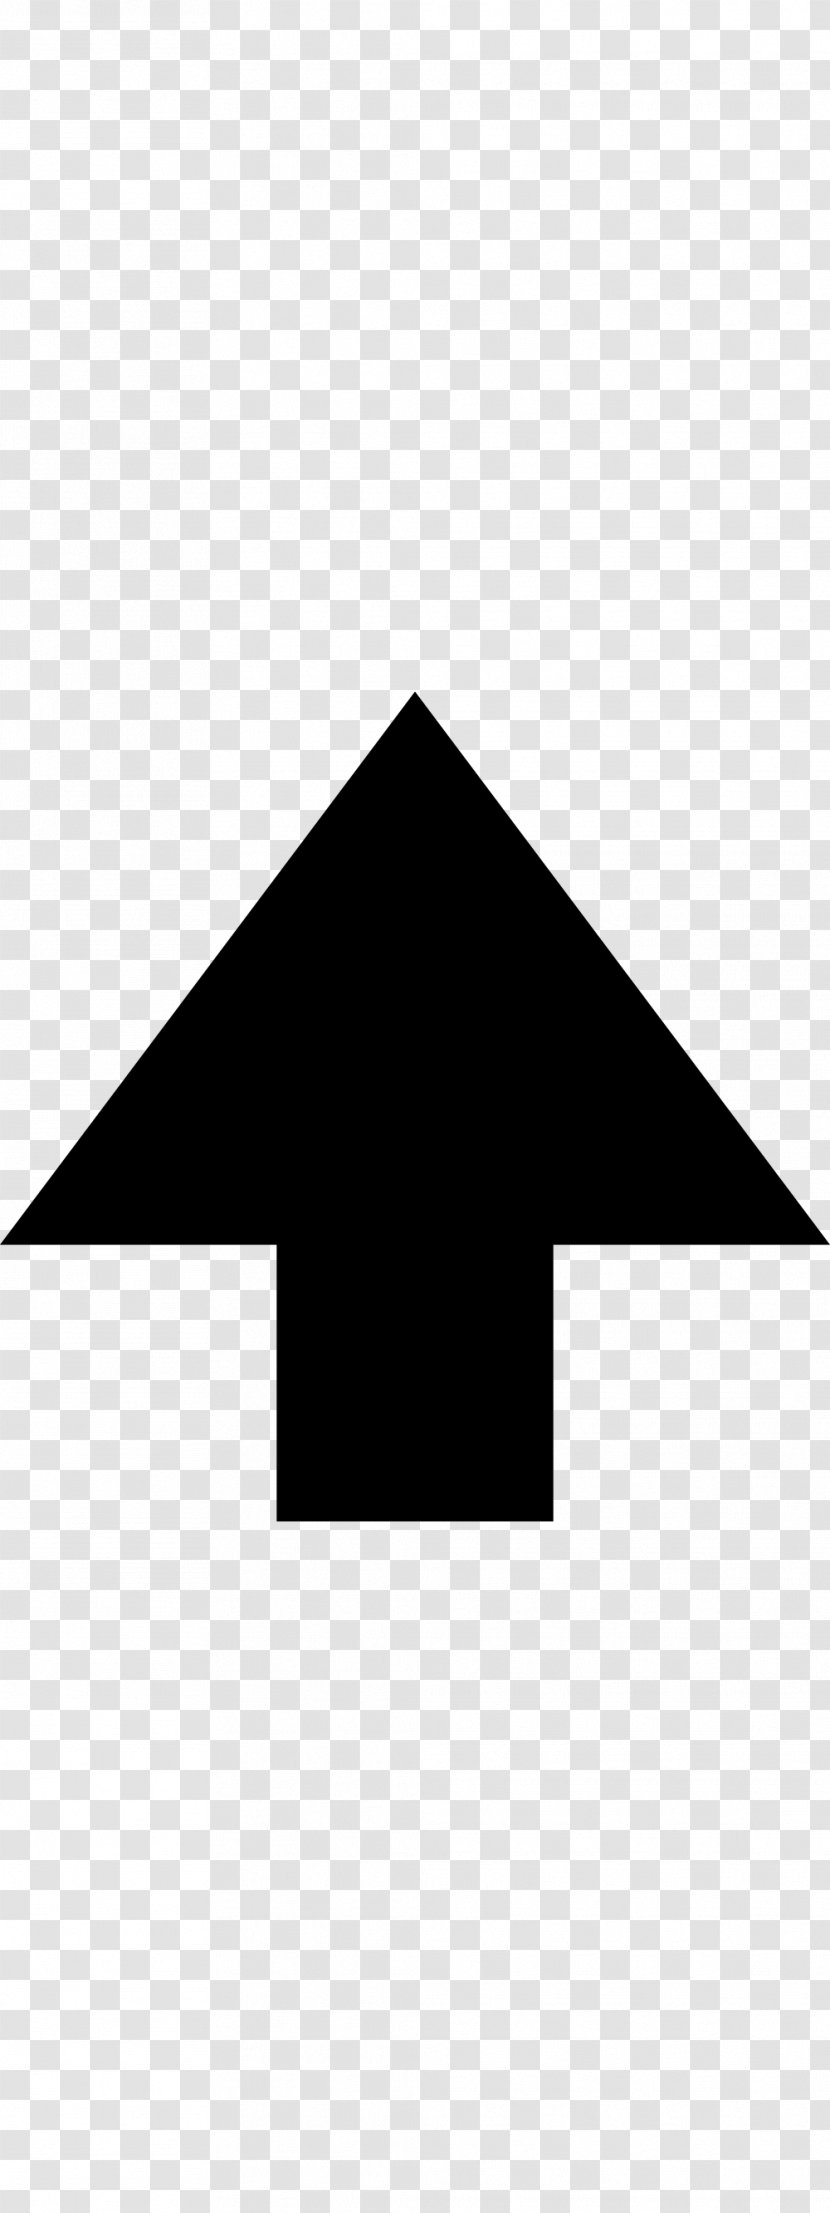 Arrow - Black And White - Up Transparent PNG